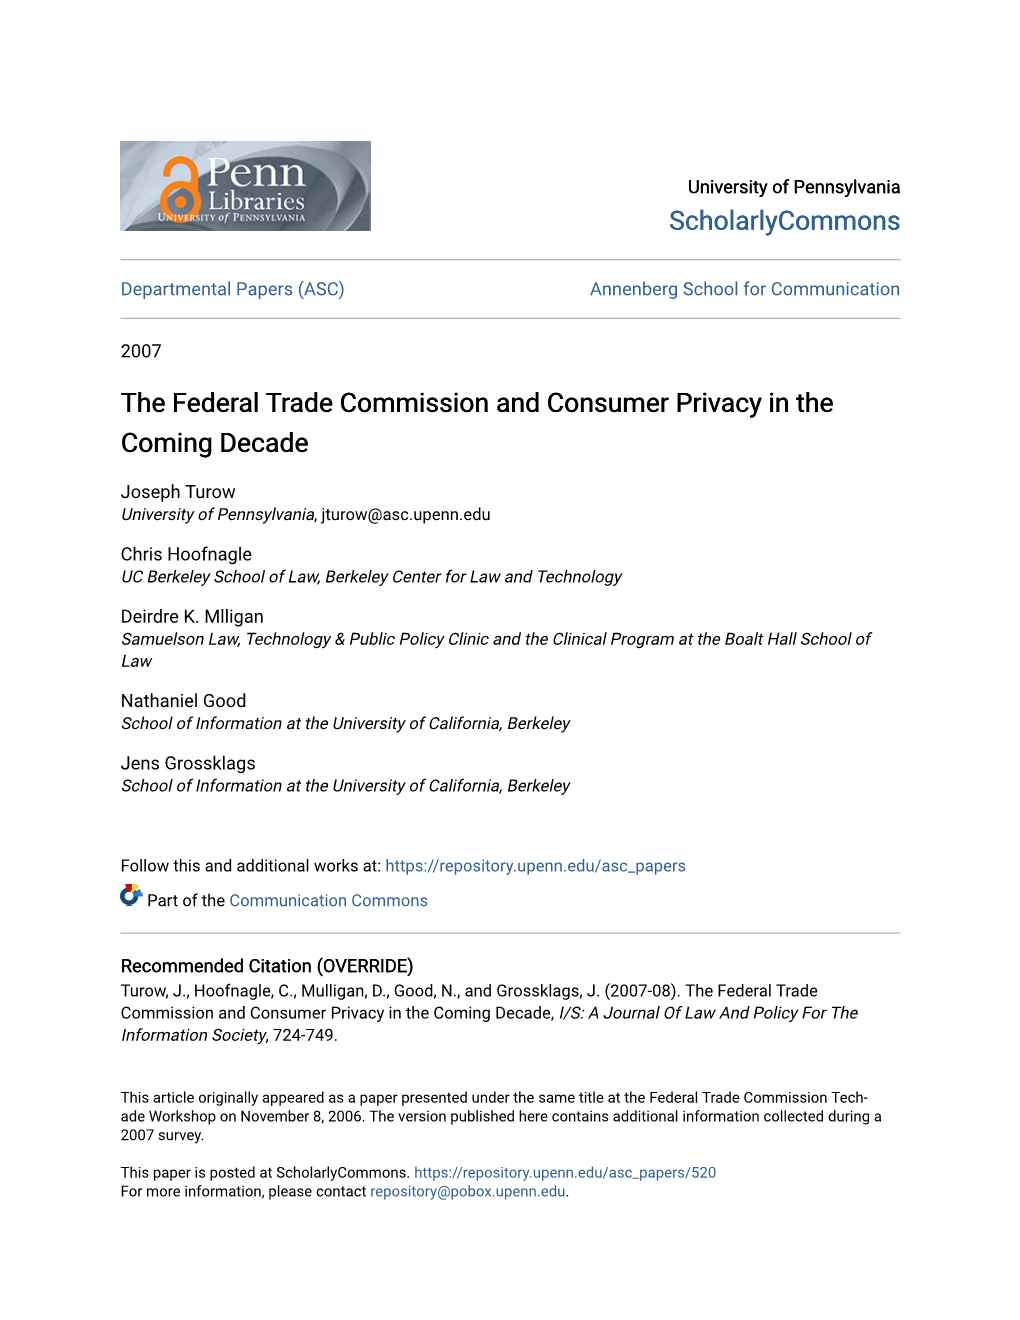 The Federal Trade Commission and Consumer Privacy in the Coming Decade